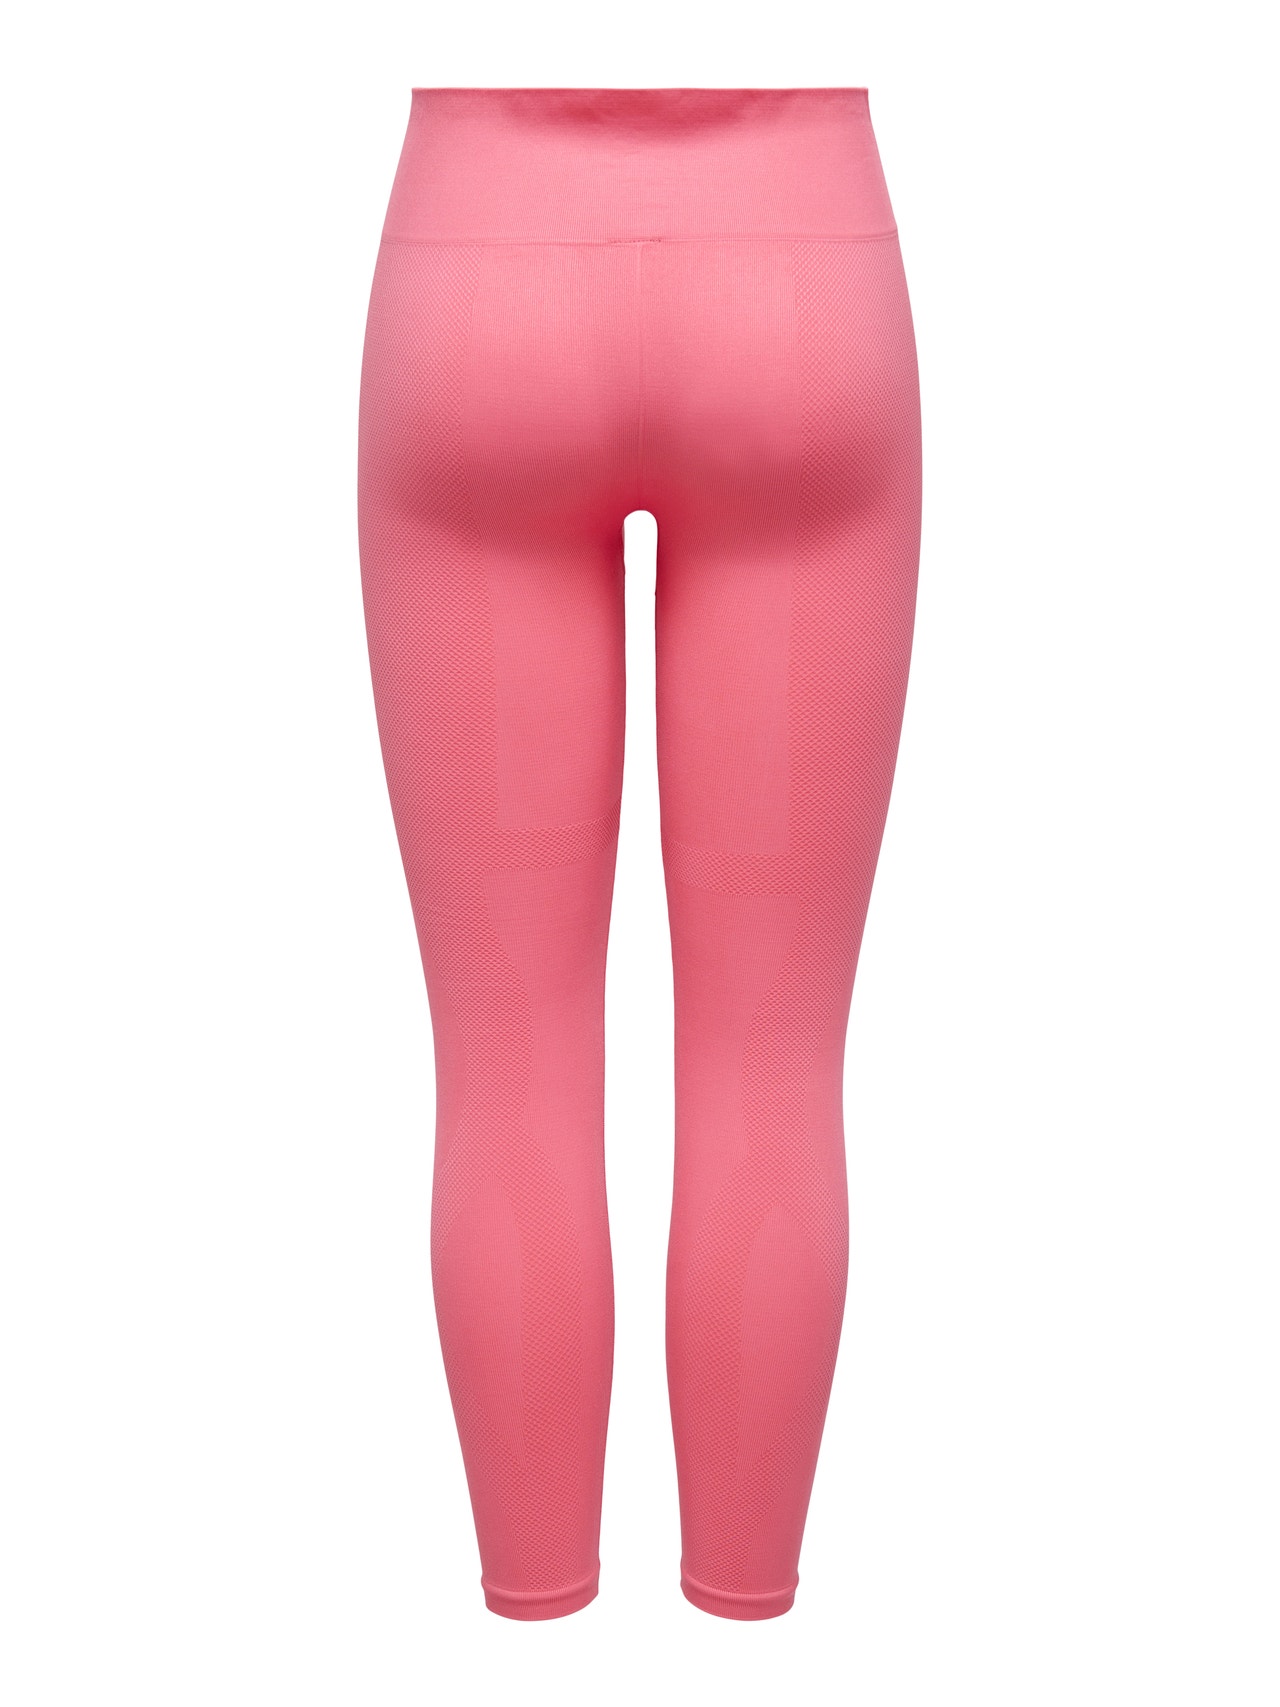 ONLY High waist training tights -Sun Kissed Coral - 15280593